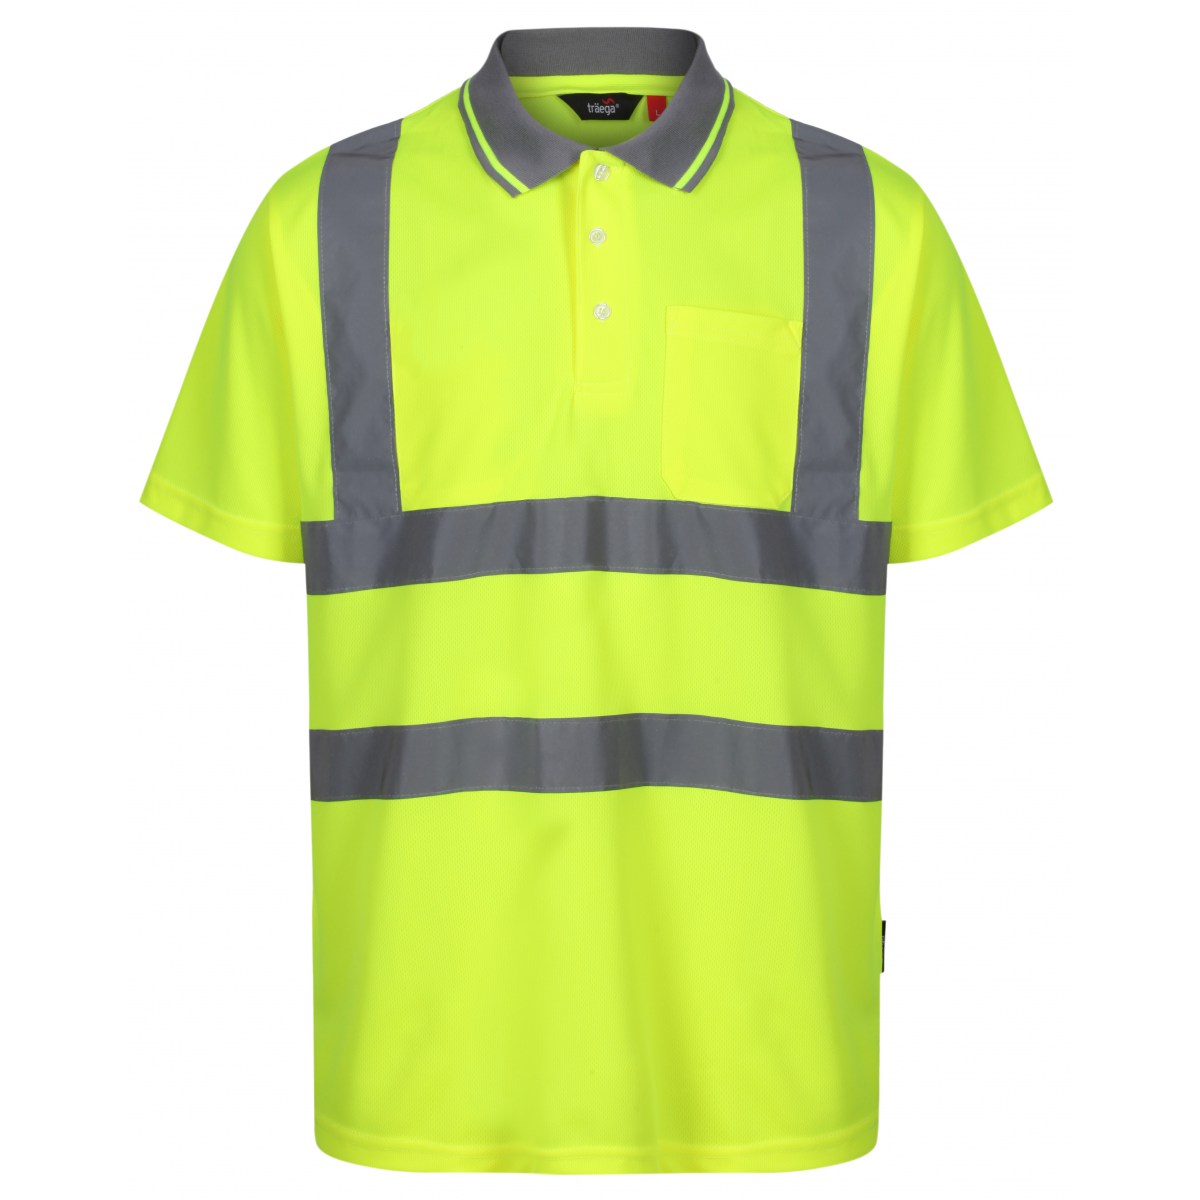 TPS01 HI VIS POLO SHIRT - AAA Safety Supplies Limited